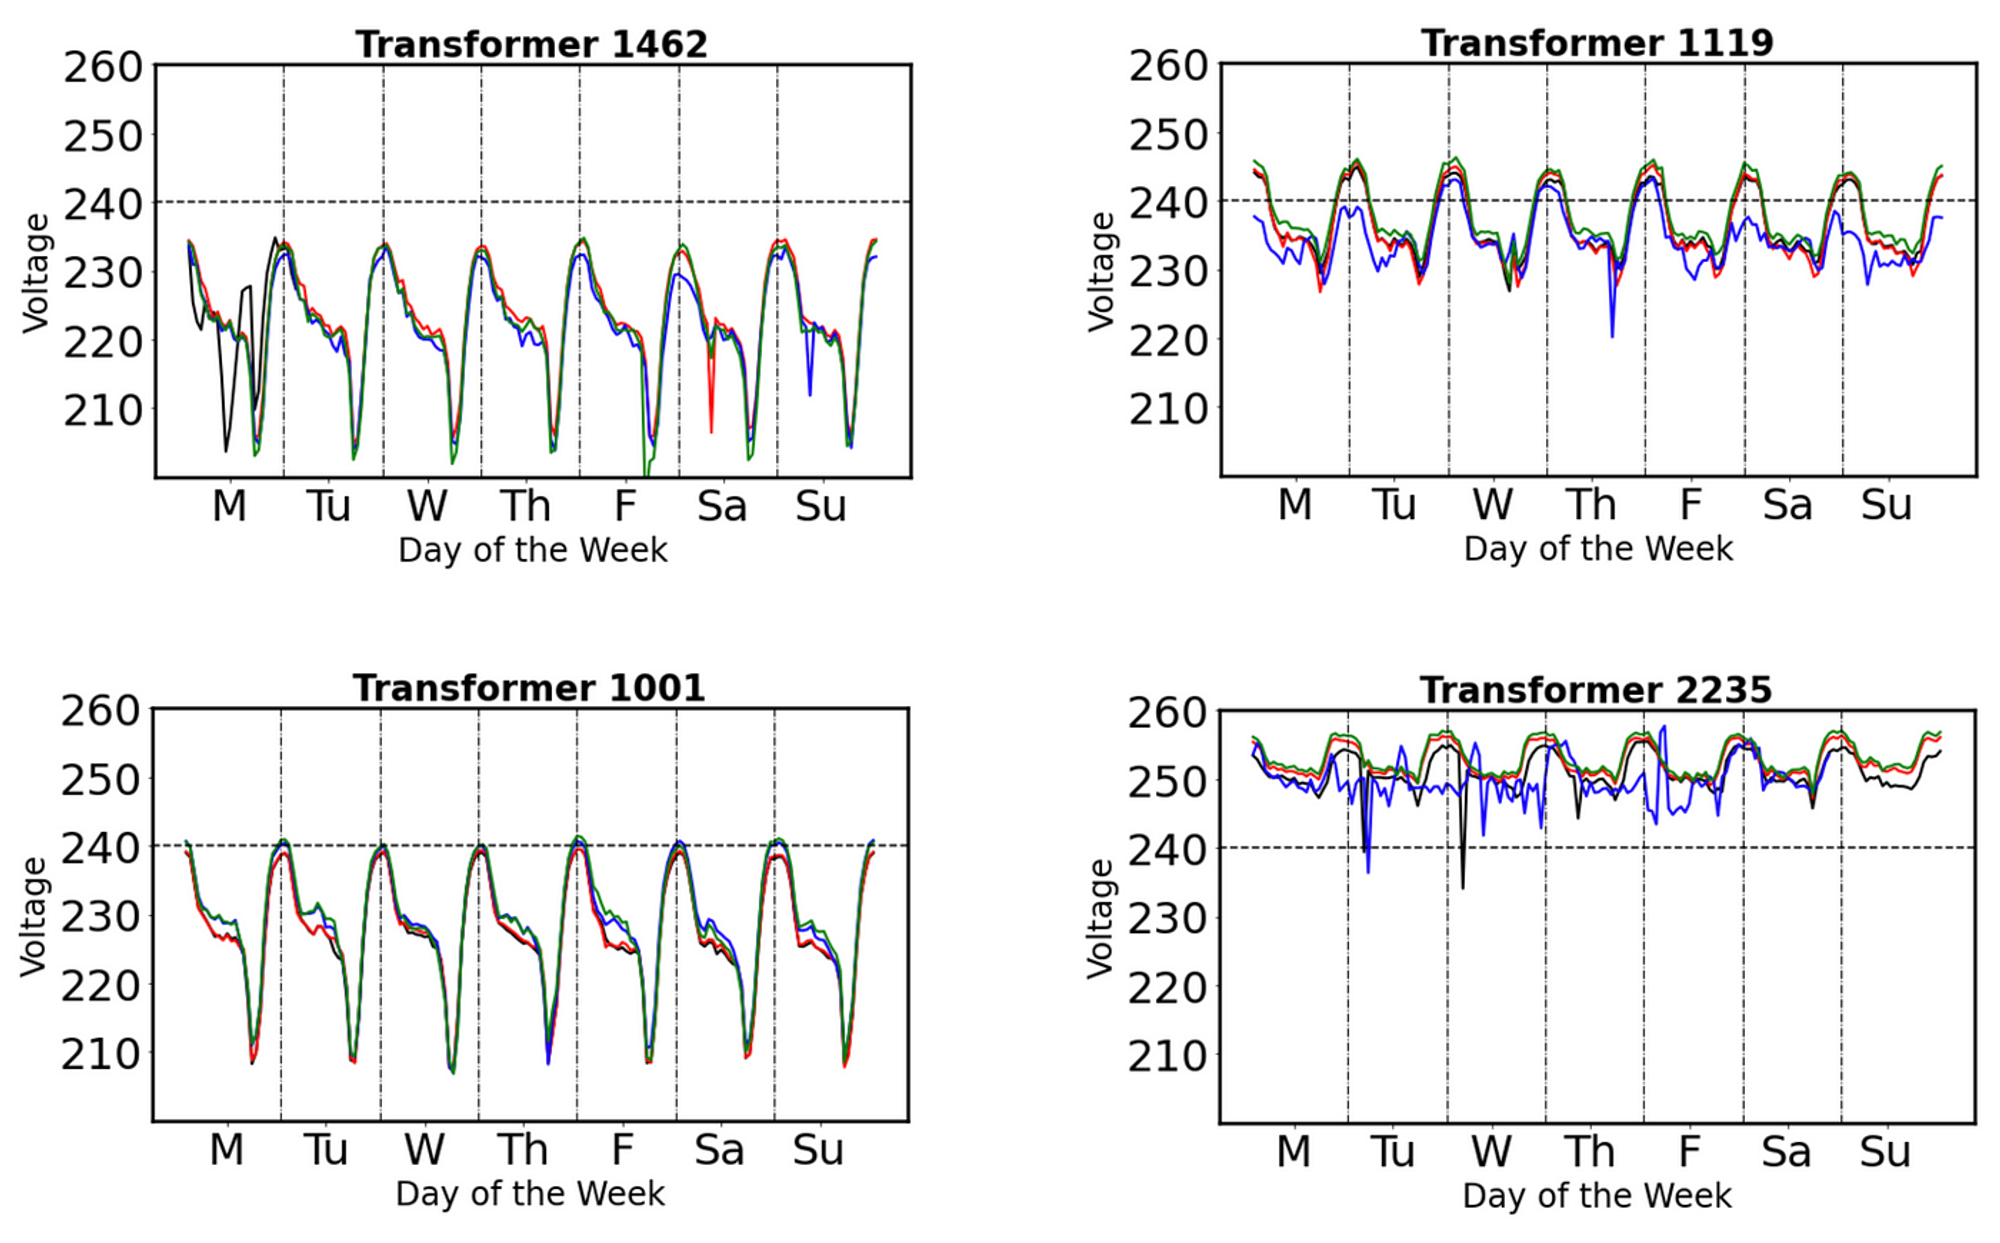 Figure 3: Averaged Voltage Profiles by Day of Week. Four sites are shown from the 150 total sites studied in Kenya. In each site, four average weekly voltage plots are shown for each of the four sensors deployed in that site. The transformer numbers are unique site IDs assigned during the study and the values do not have any relationship with the voltages or transformer identifiers at those sites.